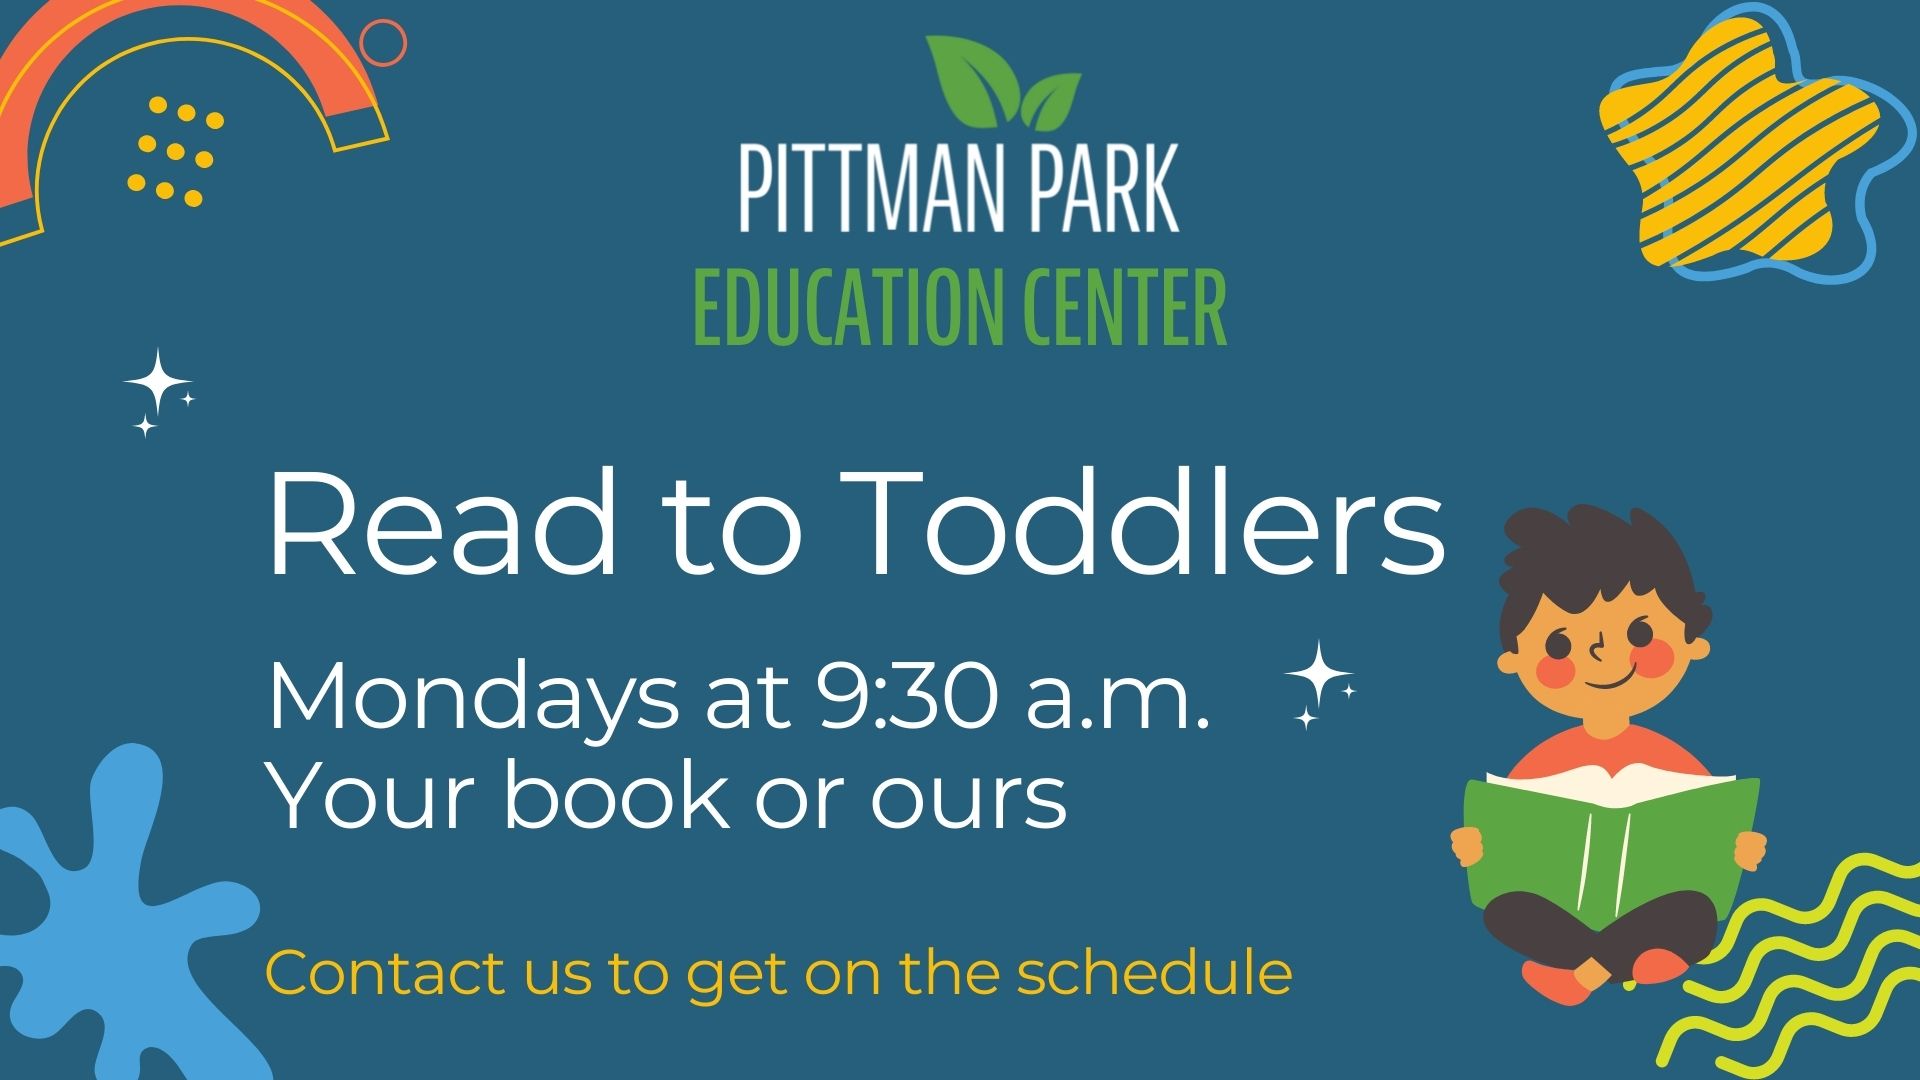 Read a Book to Toddlers